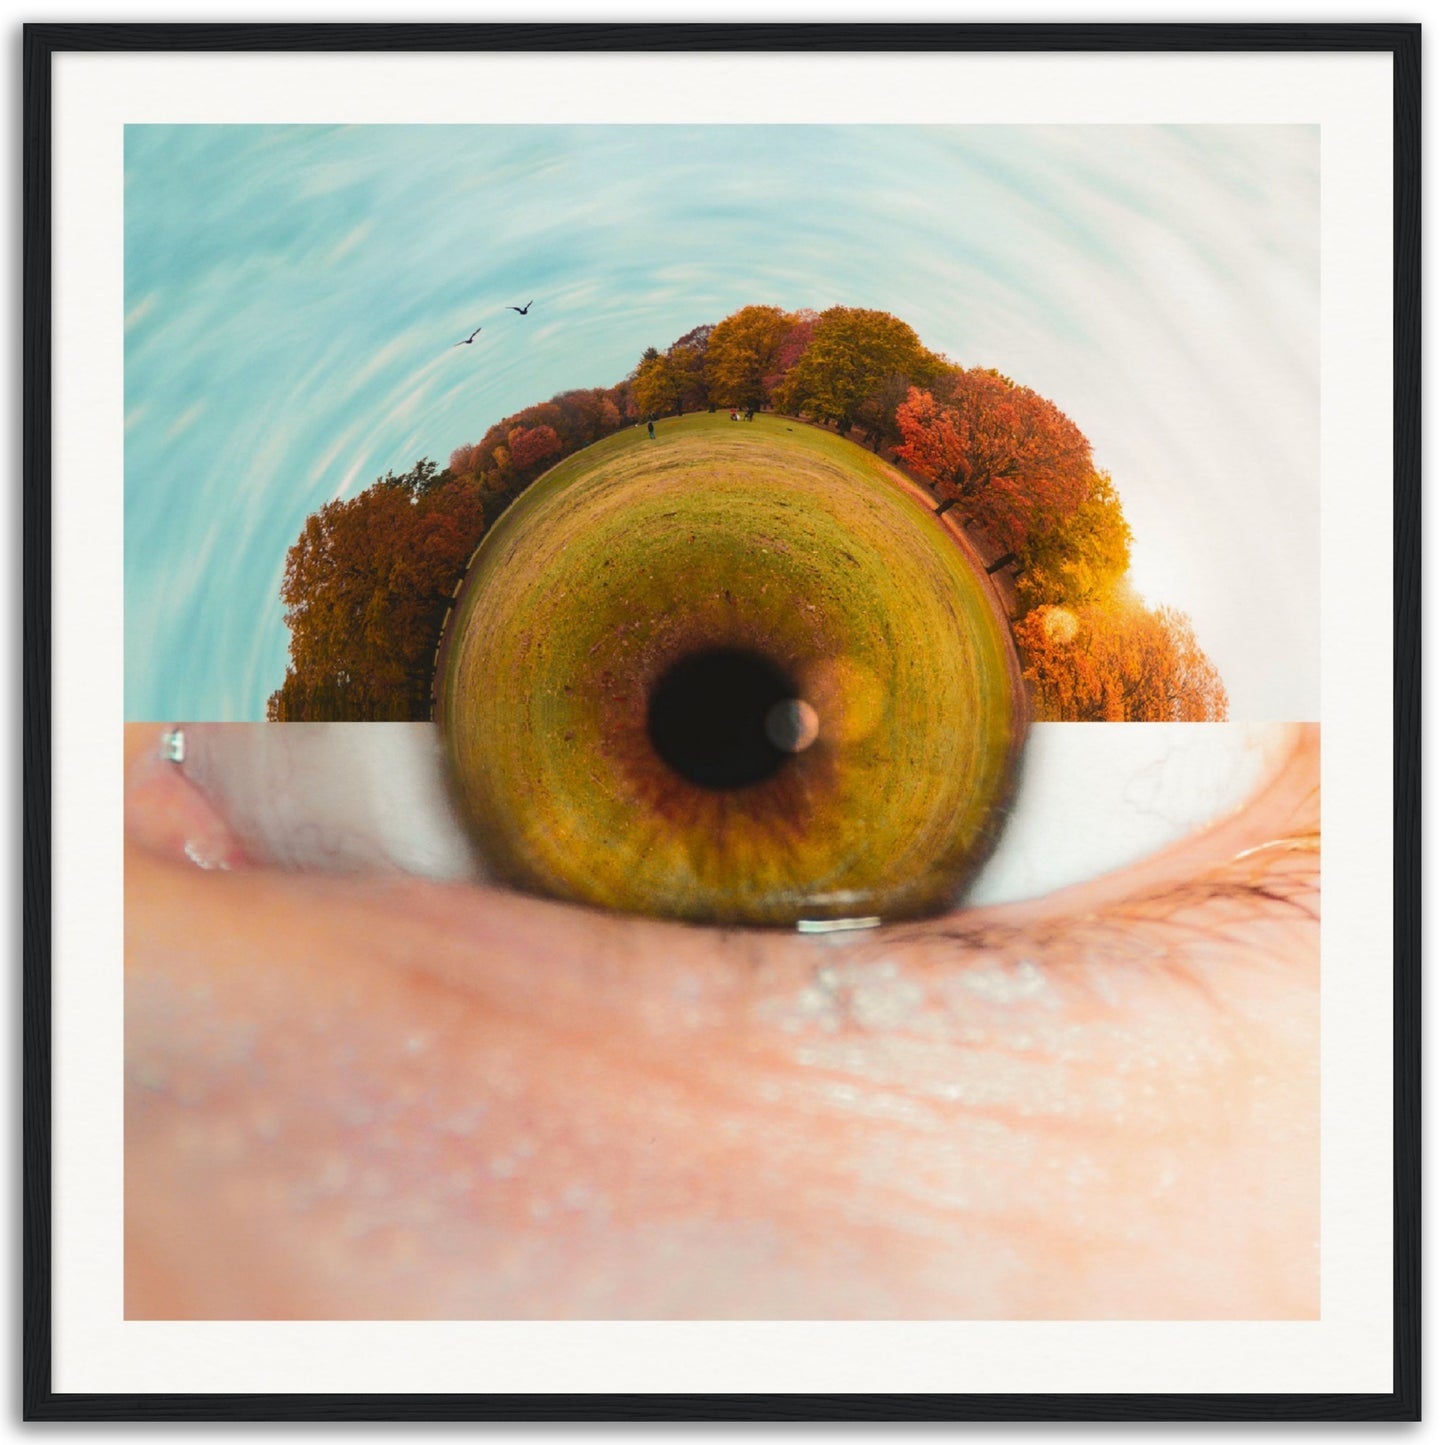 Seeing Is BeLEAFing - Museum-Quality Framed Art Print